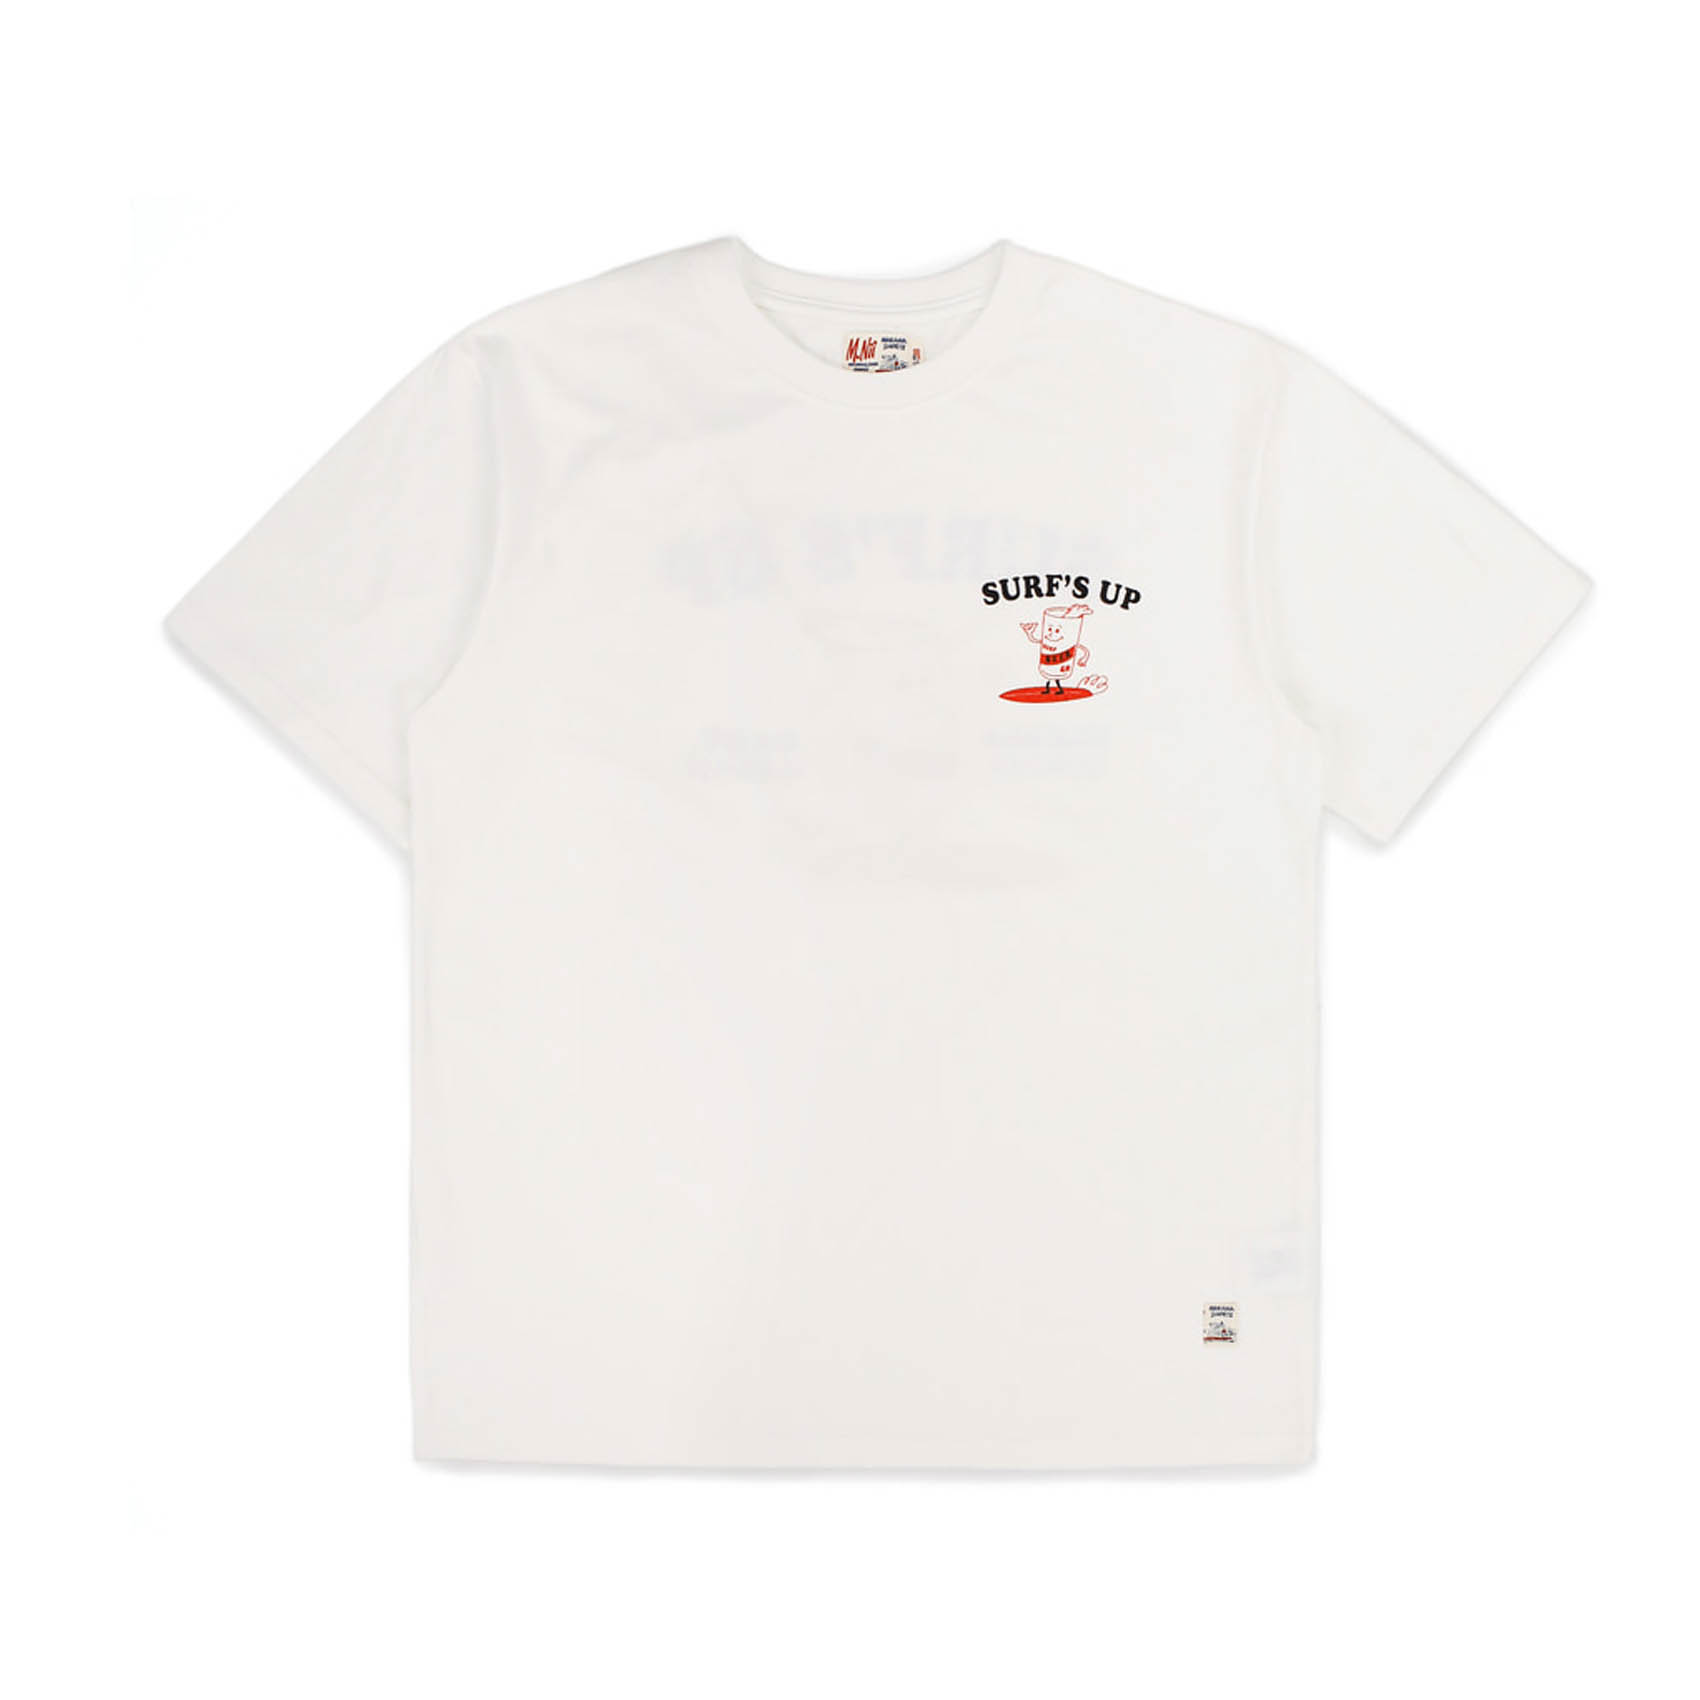 WHATS UP T-SHIRTS - OFF WHITE